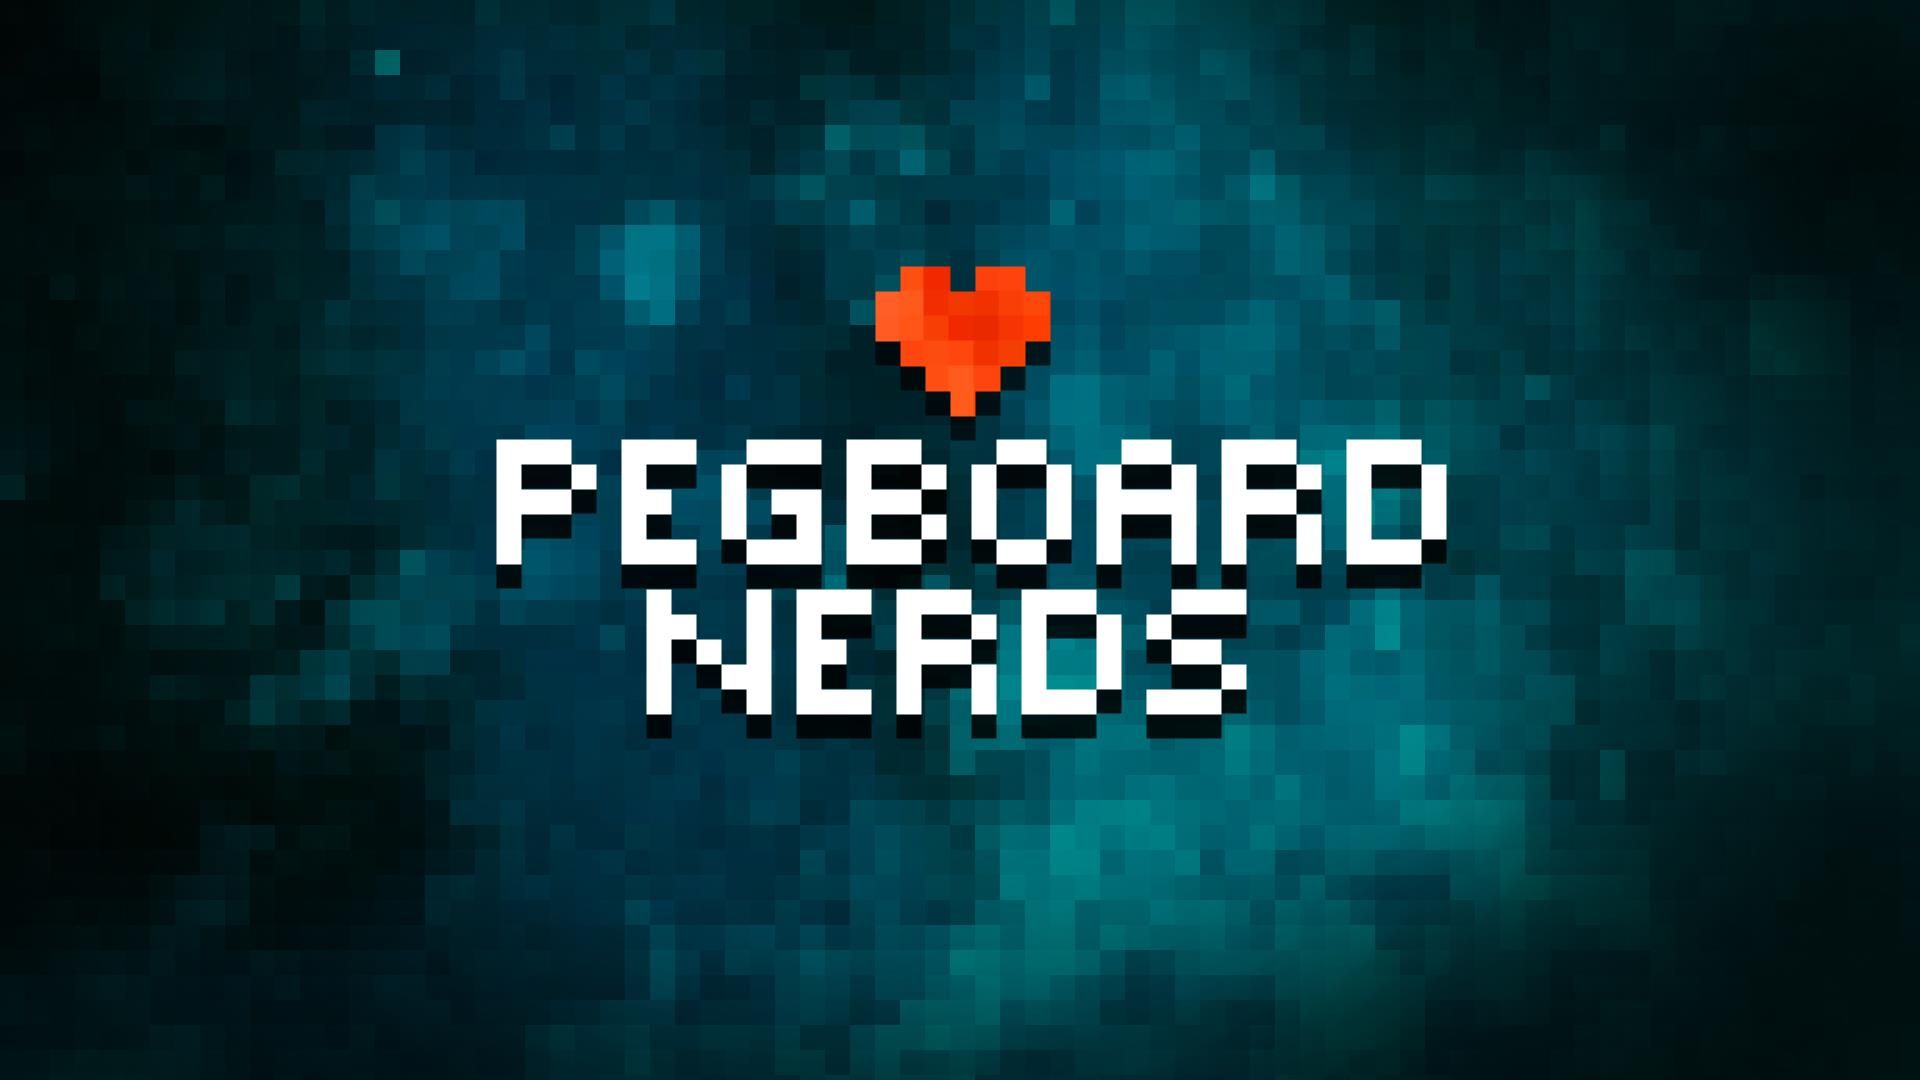 Free download SUBstance Wednesdays PEGBOARD NERDS Foundation